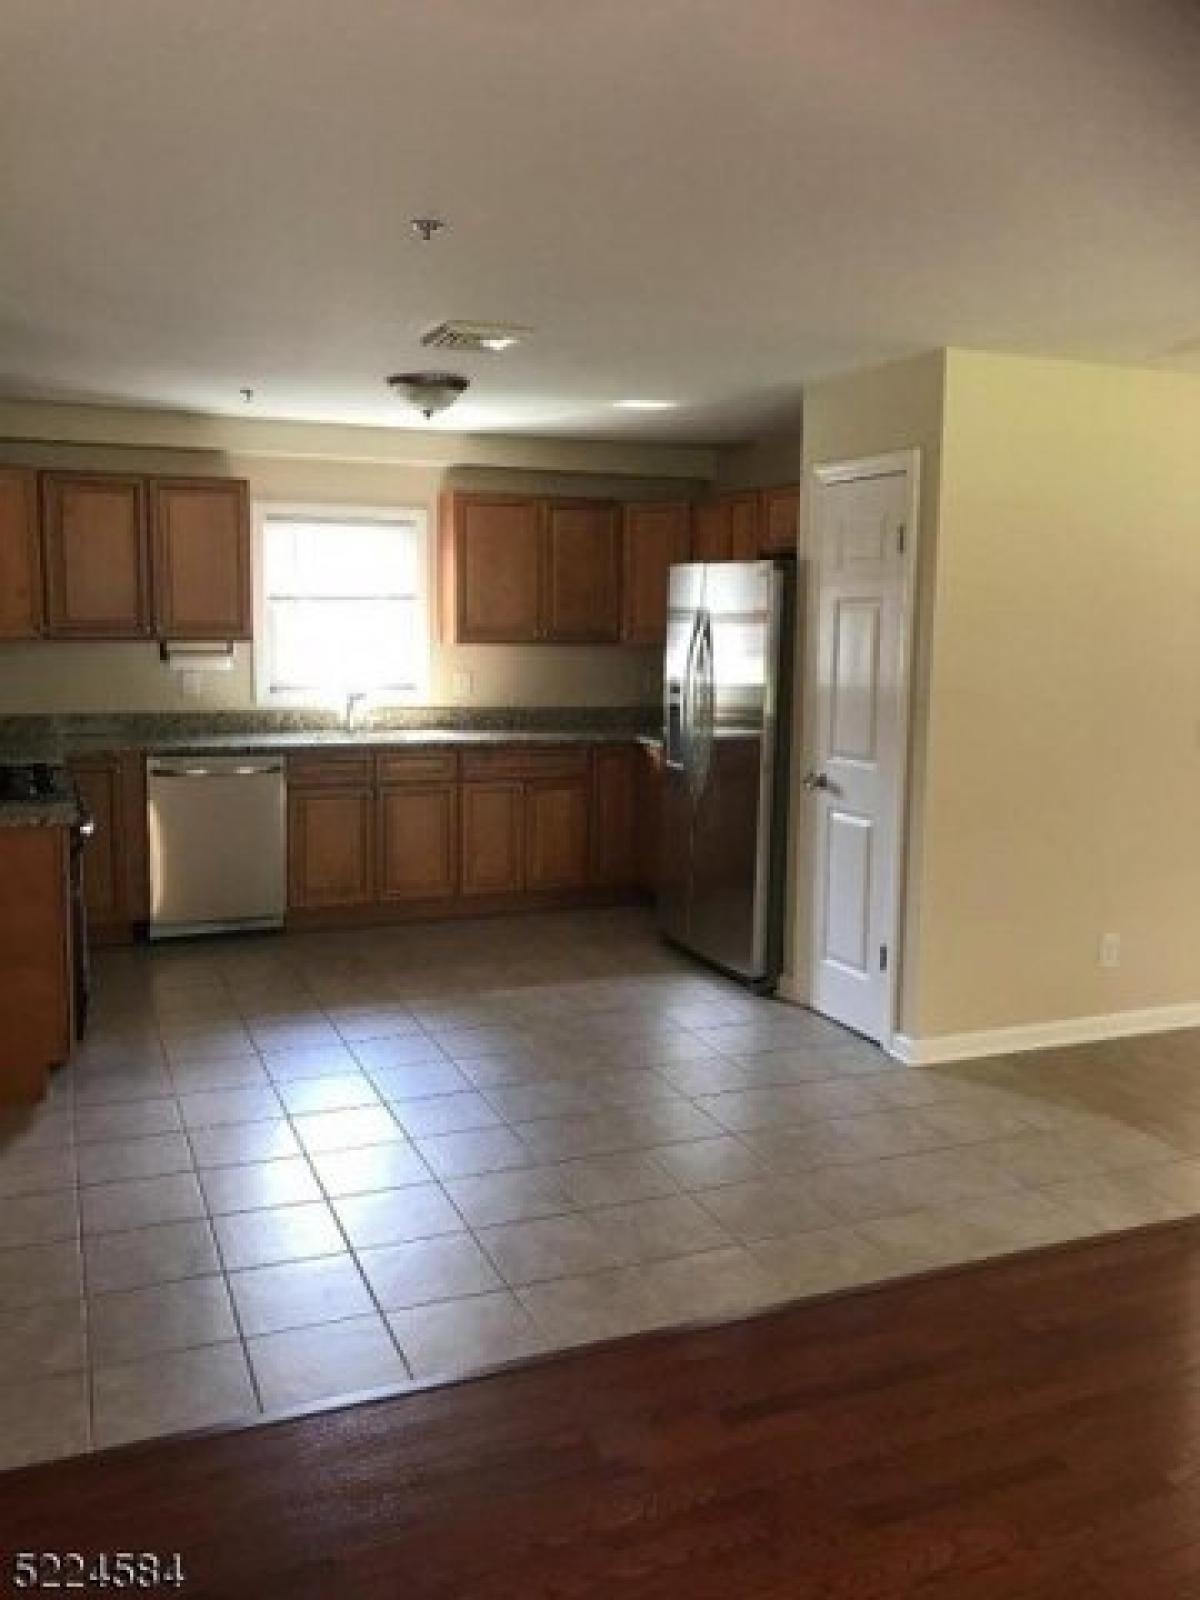 Picture of Apartment For Rent in Mountainside, New Jersey, United States